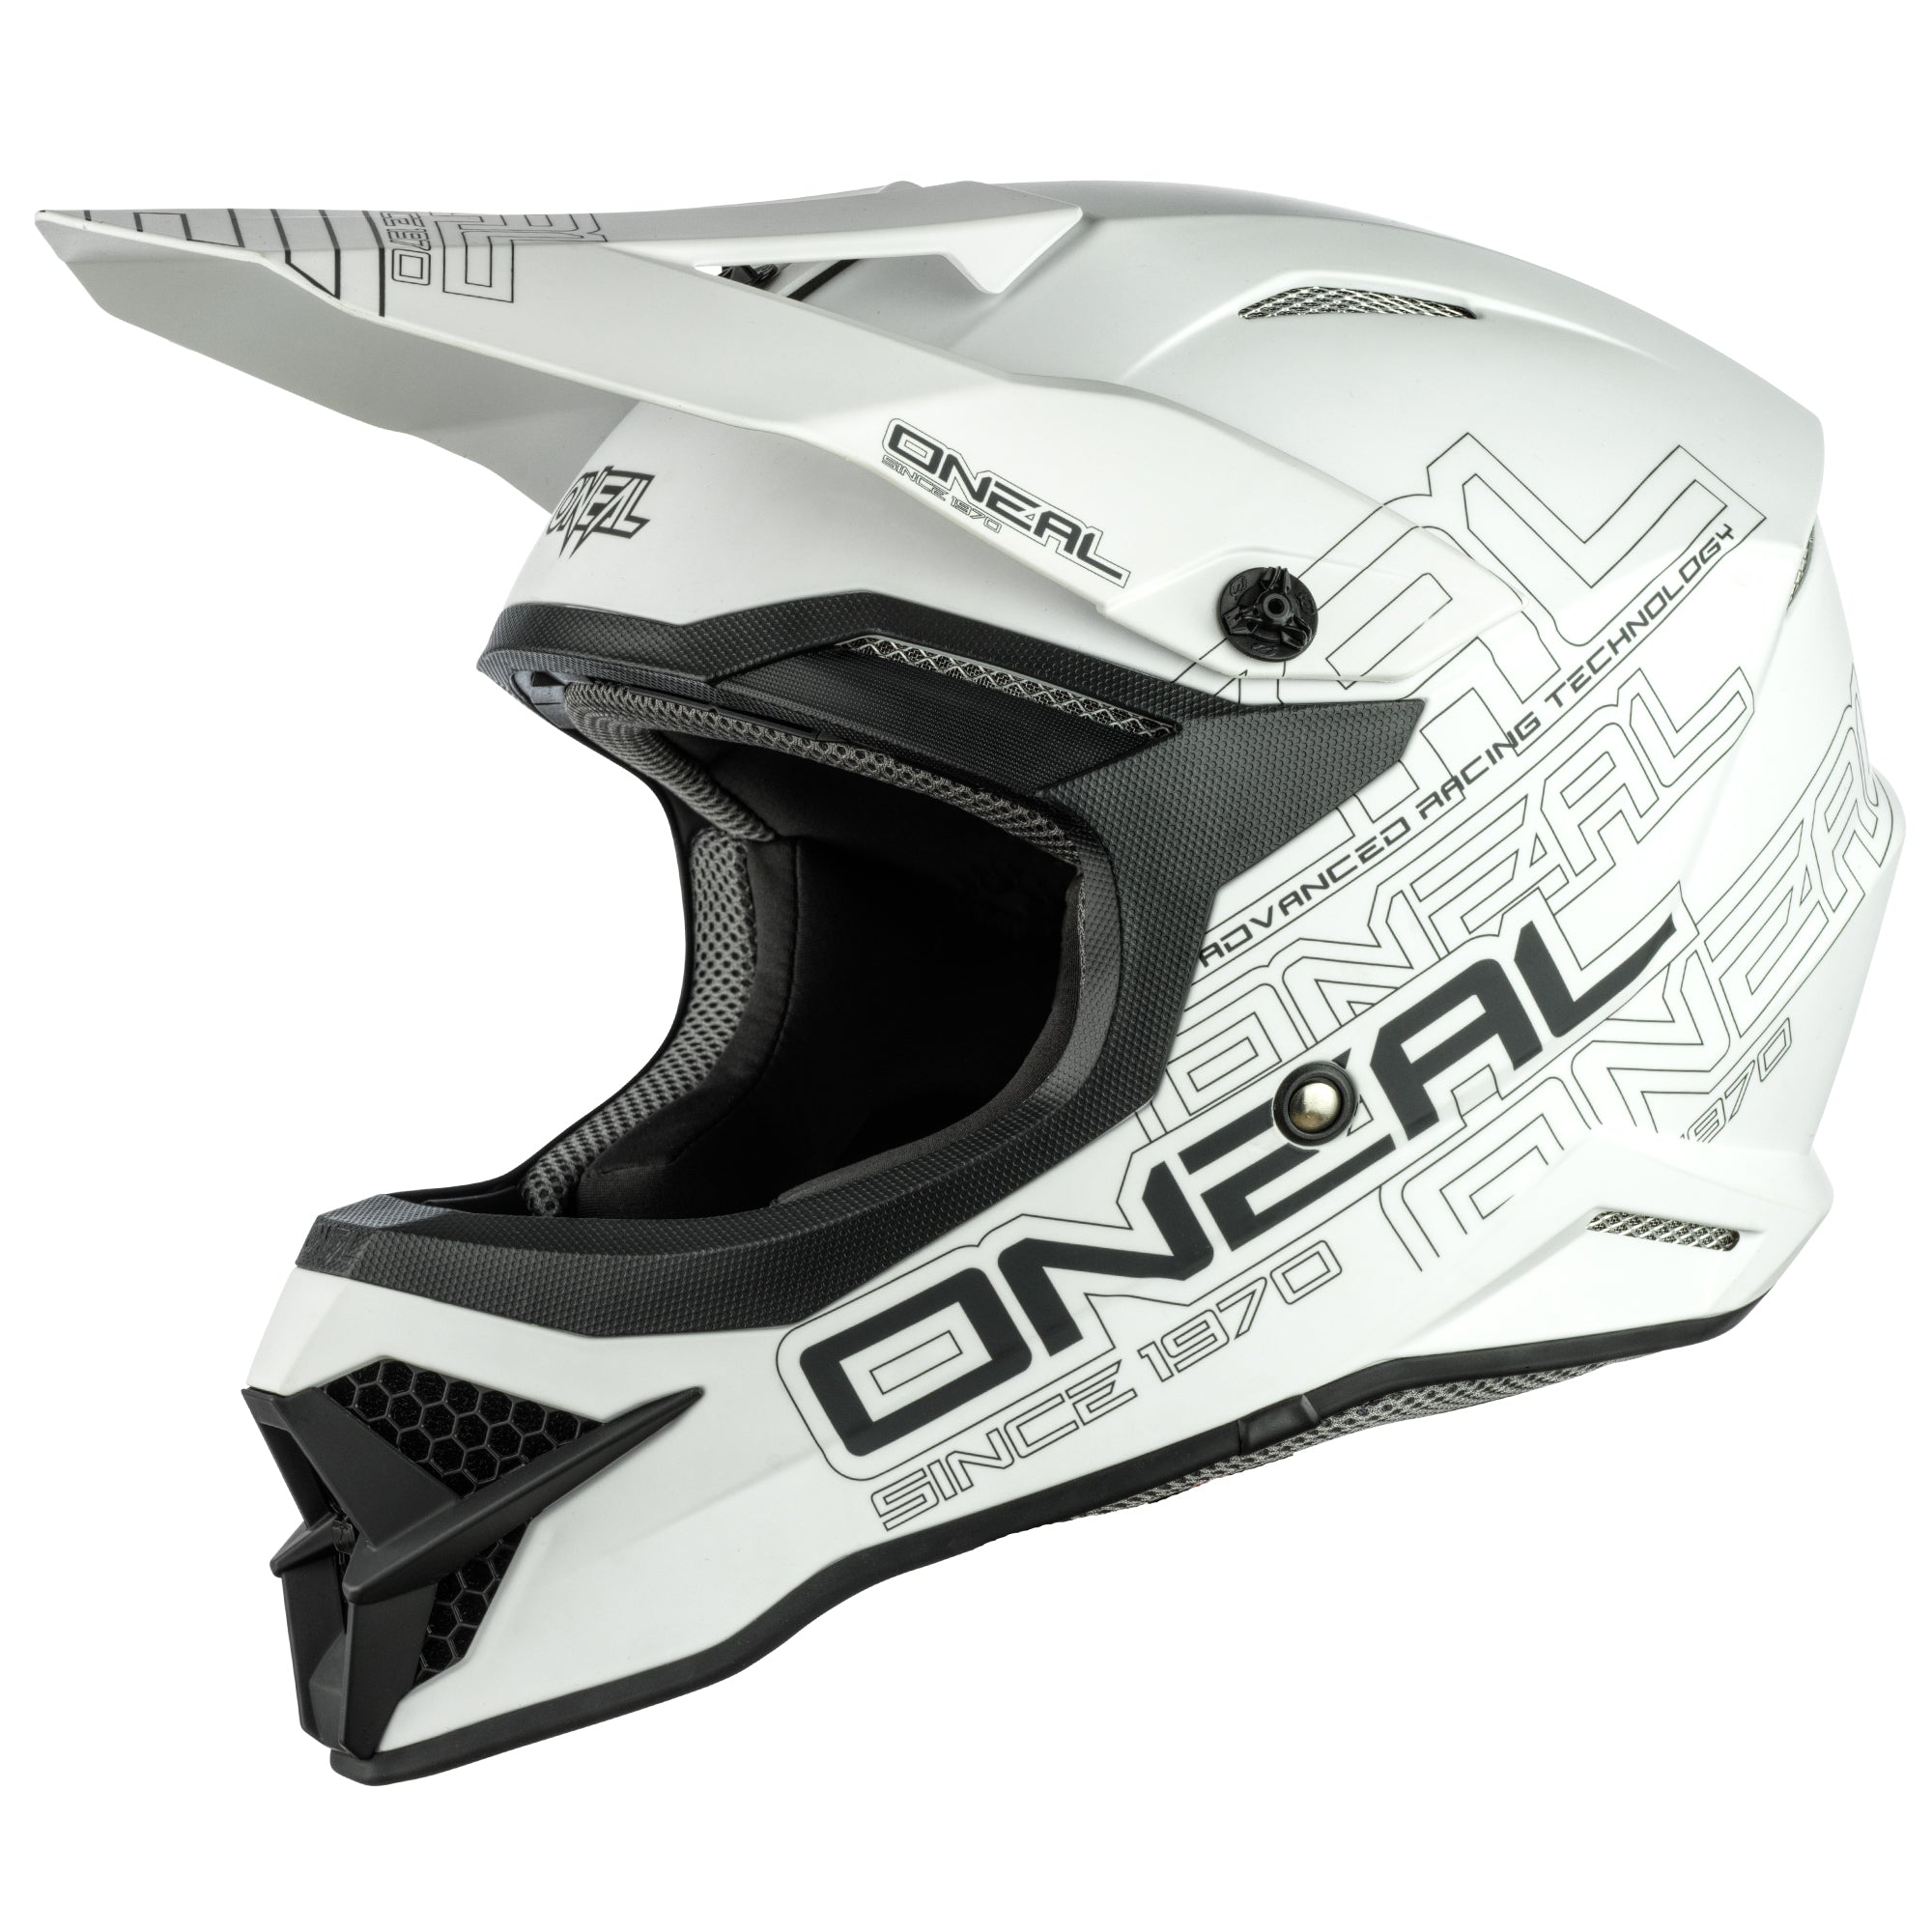 Cascos O'neal – Exclusive Moto Products (XMP)